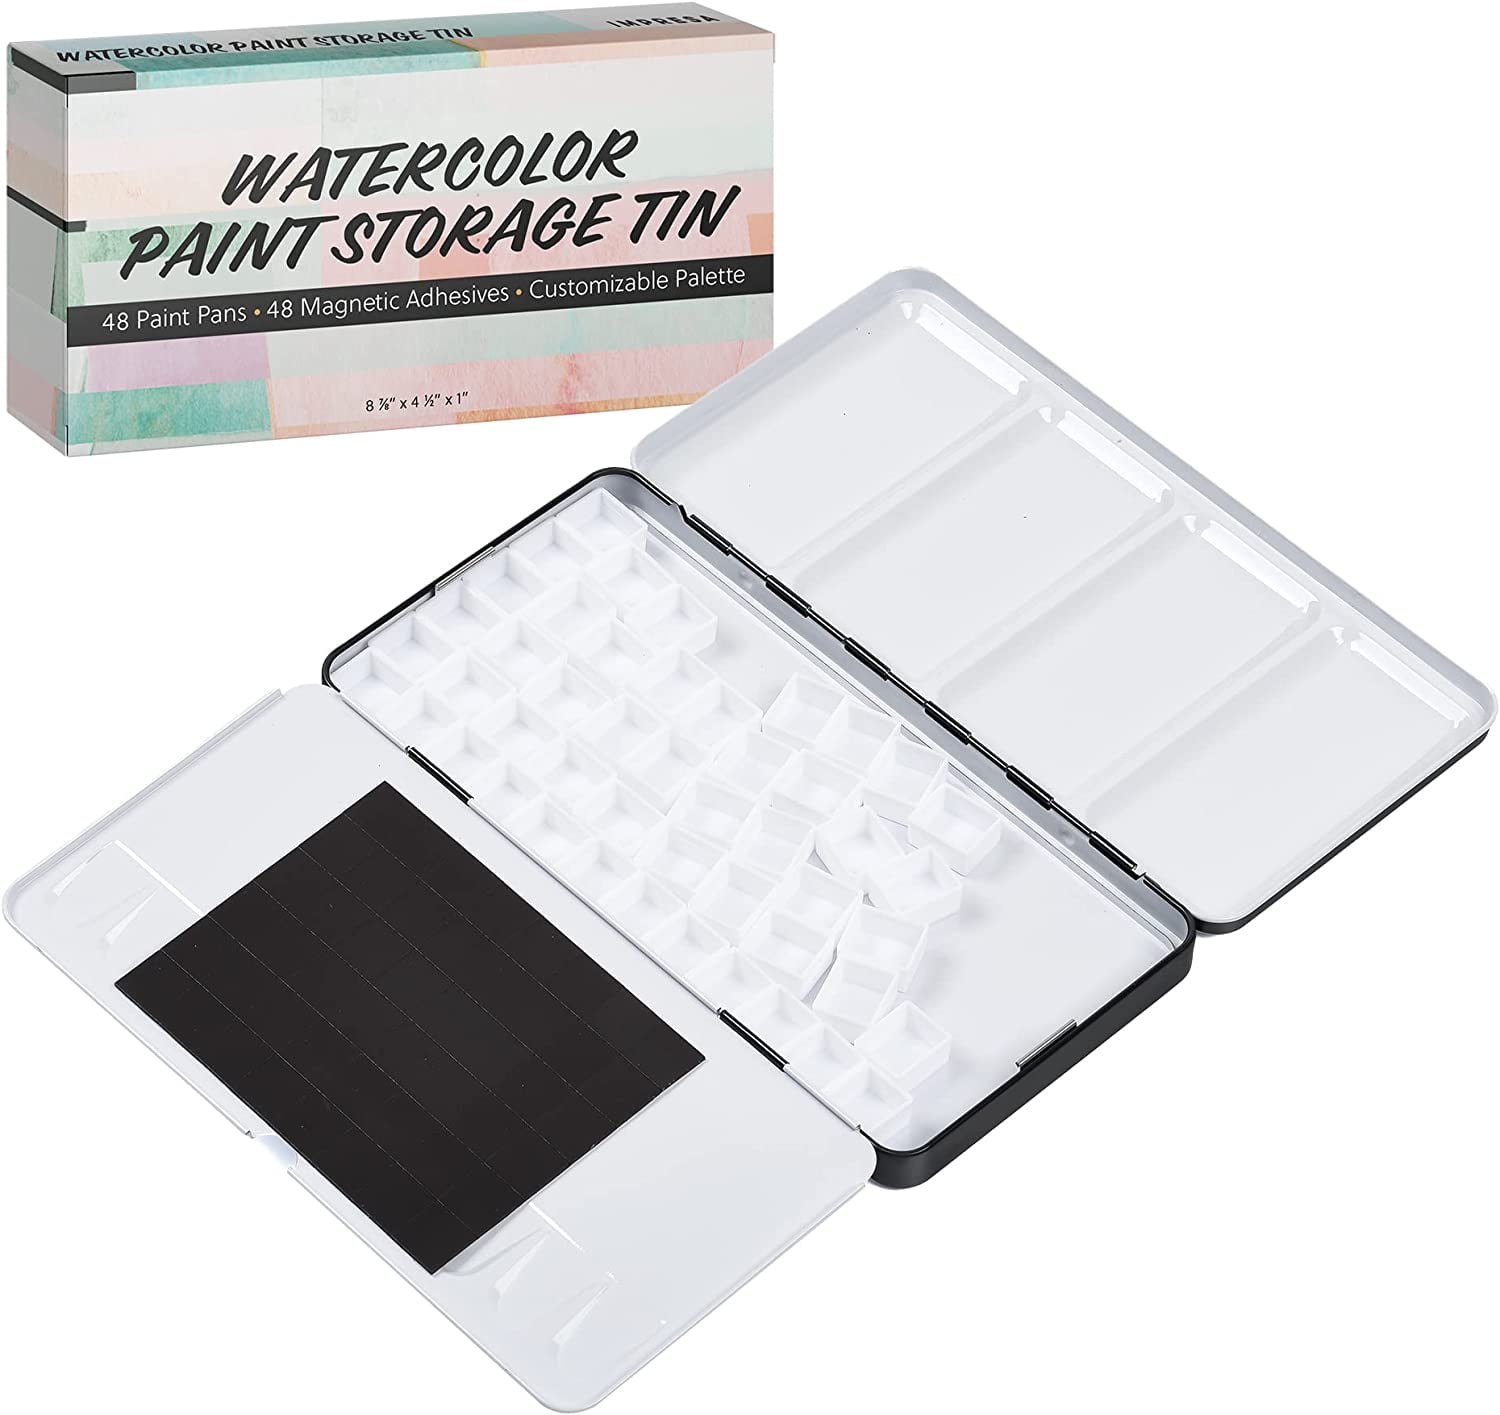 Watercolor Palette Tin with 20pcs White Plastic Empty Watercolor Full Pans Carrying Magnetic Squares- Artists Paint Palette for DIY Watercolor